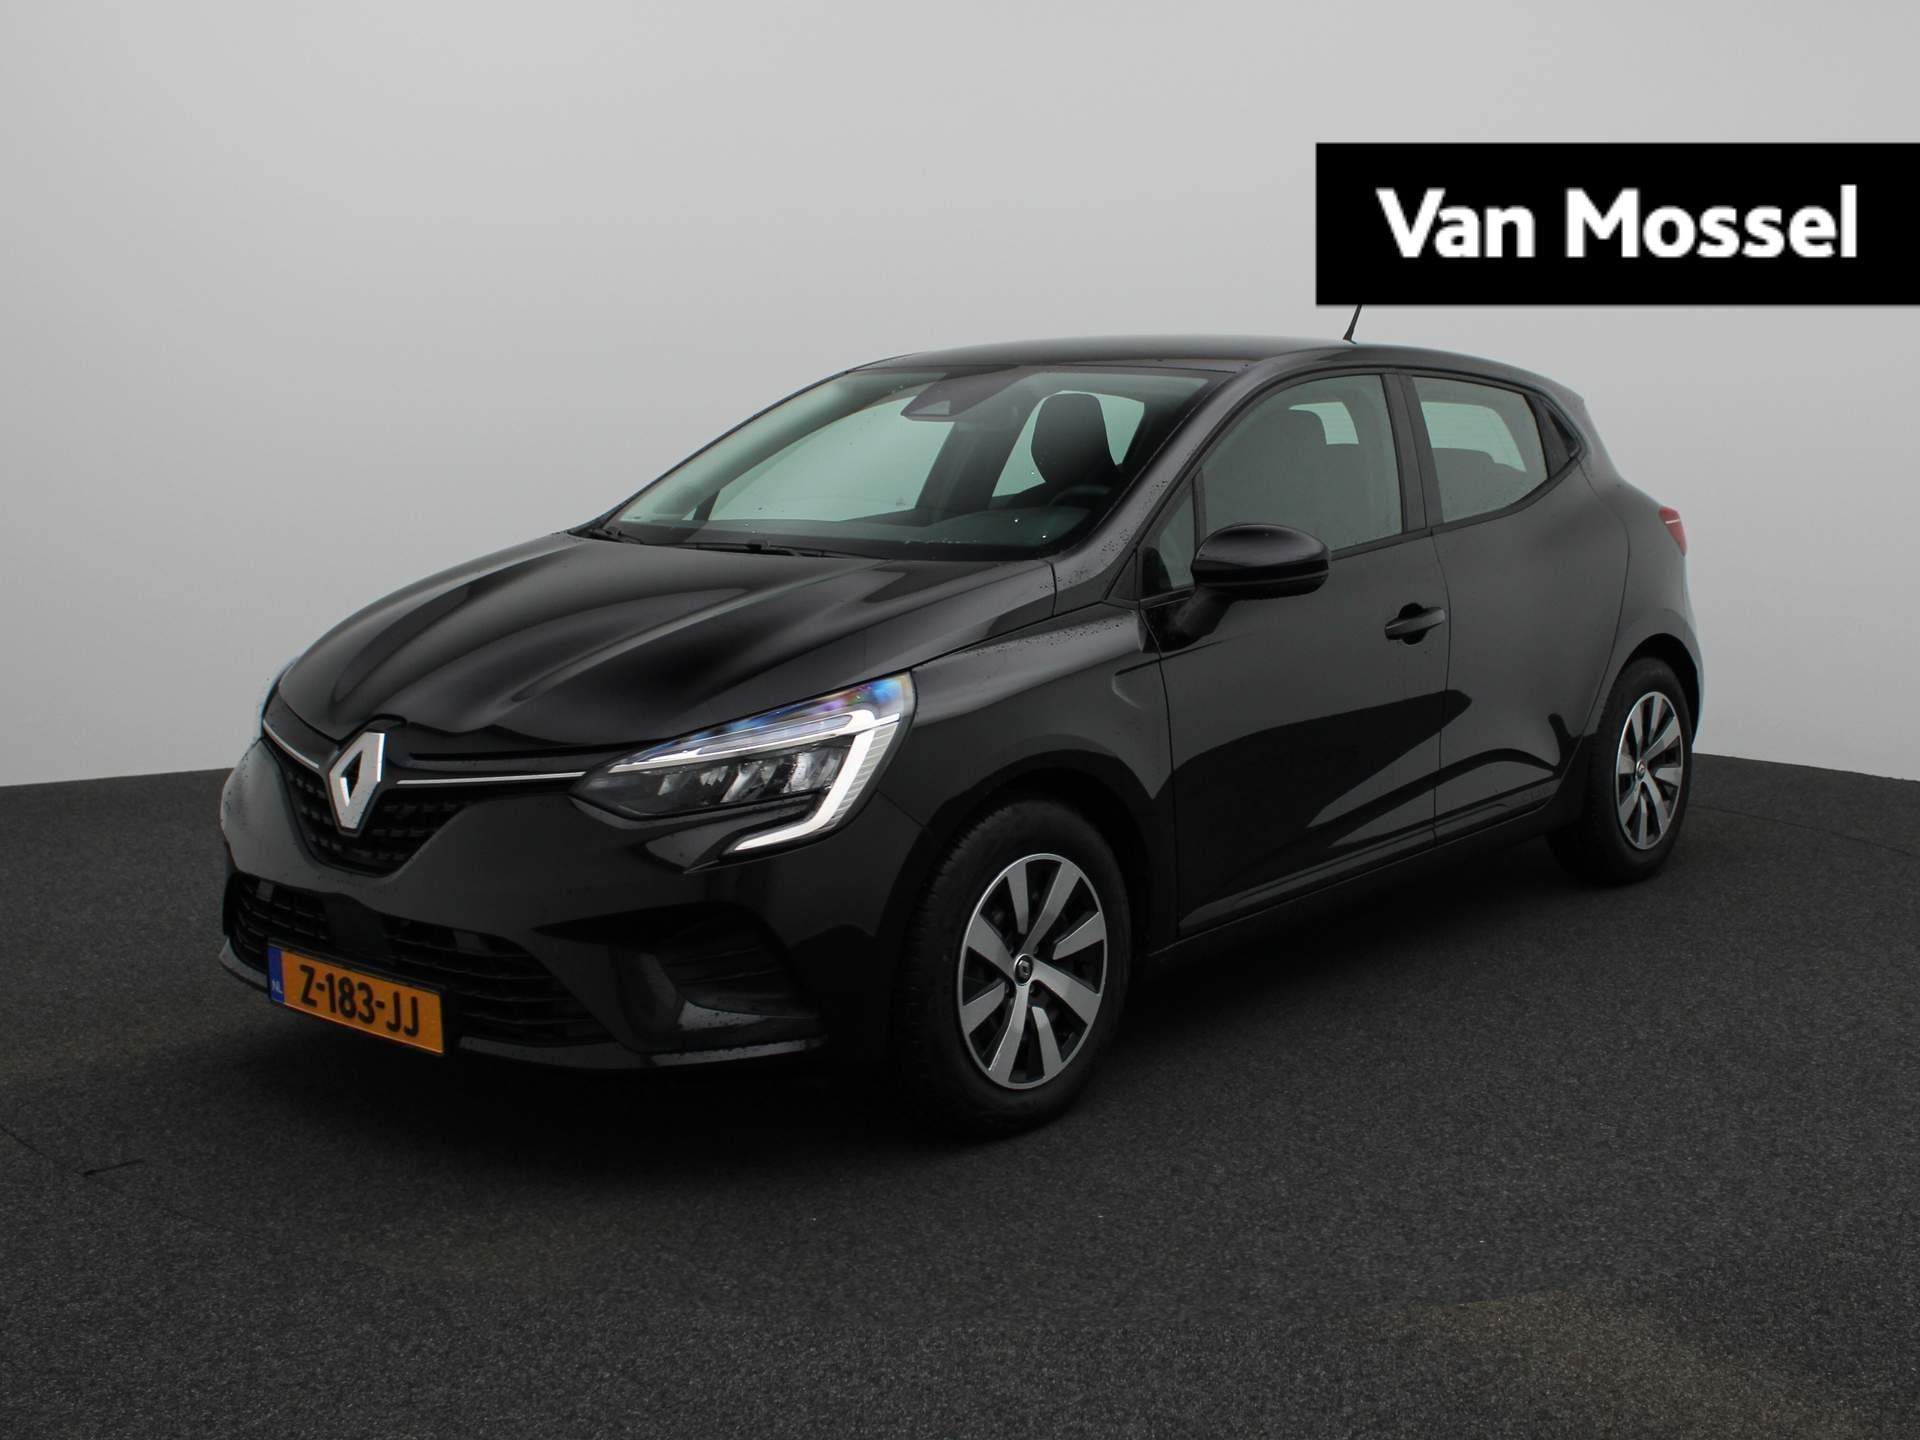 Renault Clio 1.6 E-Tech Full Hybrid 145 Equilibre | PDC Achter | Airconditioning | Draadloze Apple Carplay & Android Auto | Cruise Control | Licht- en regensensor